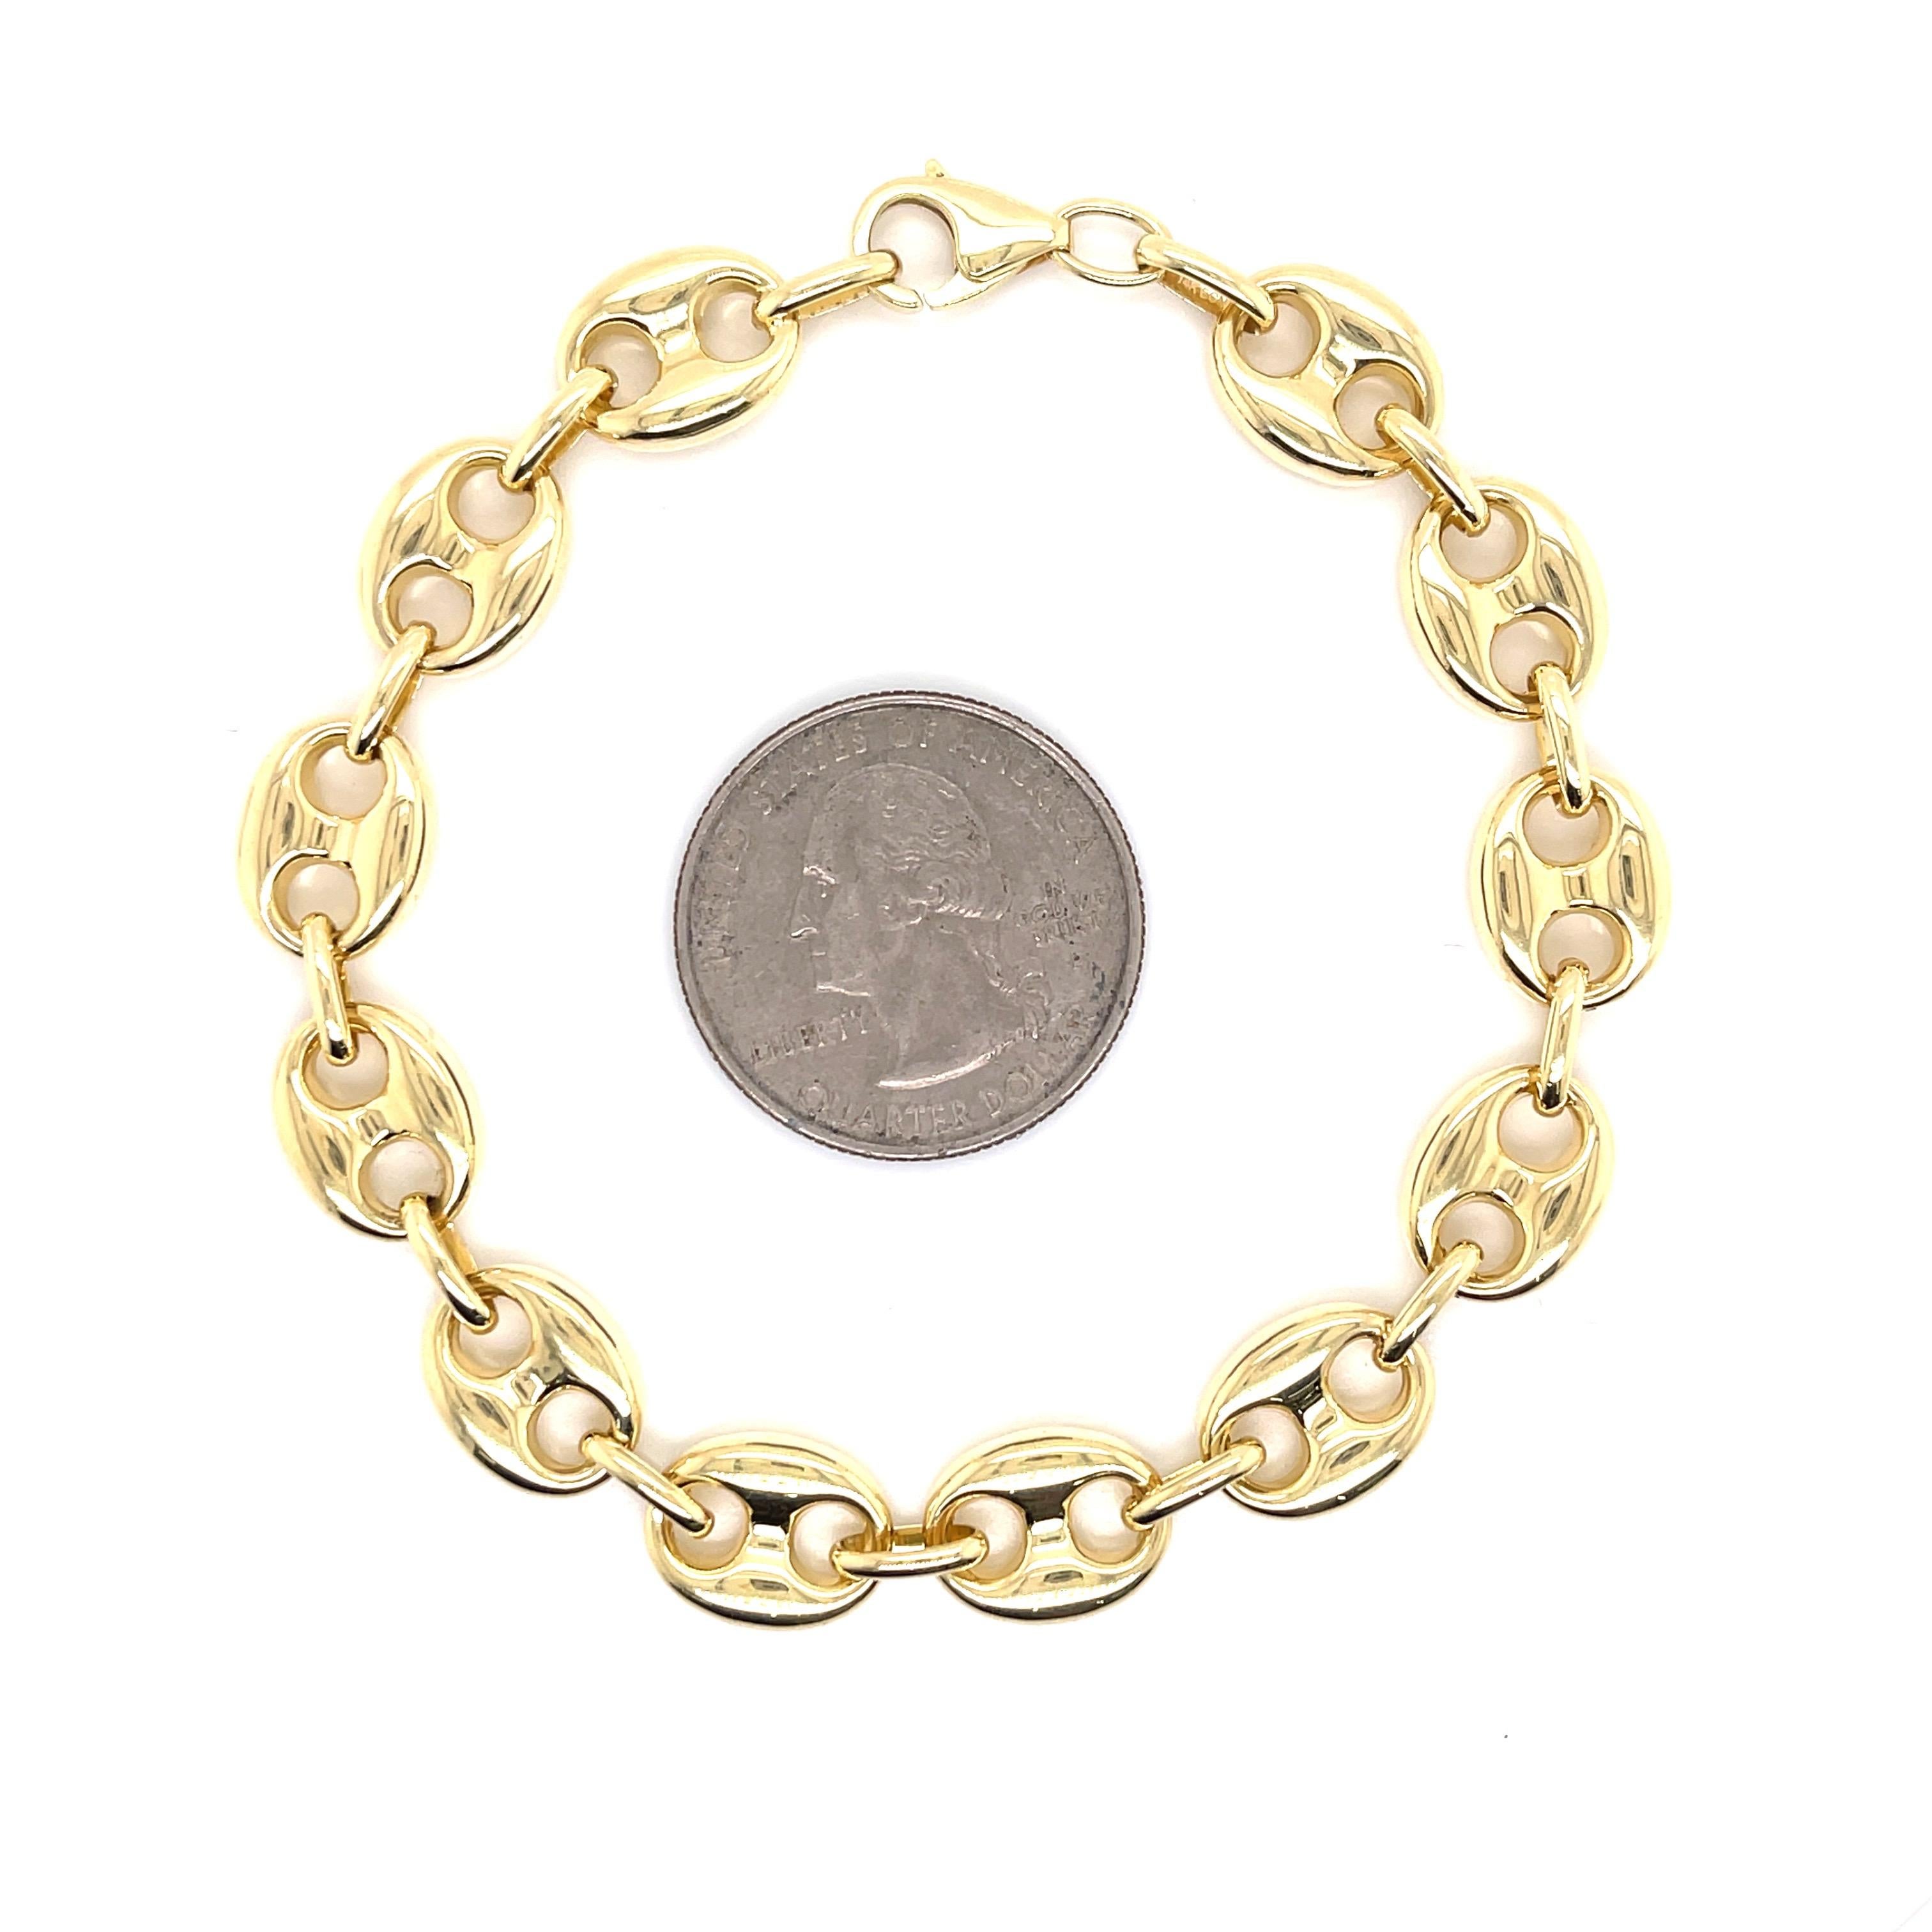 Yellow gold link bracelet featuring 12 marine links weighing 11.3 grams.
Lobster Clasp 
8